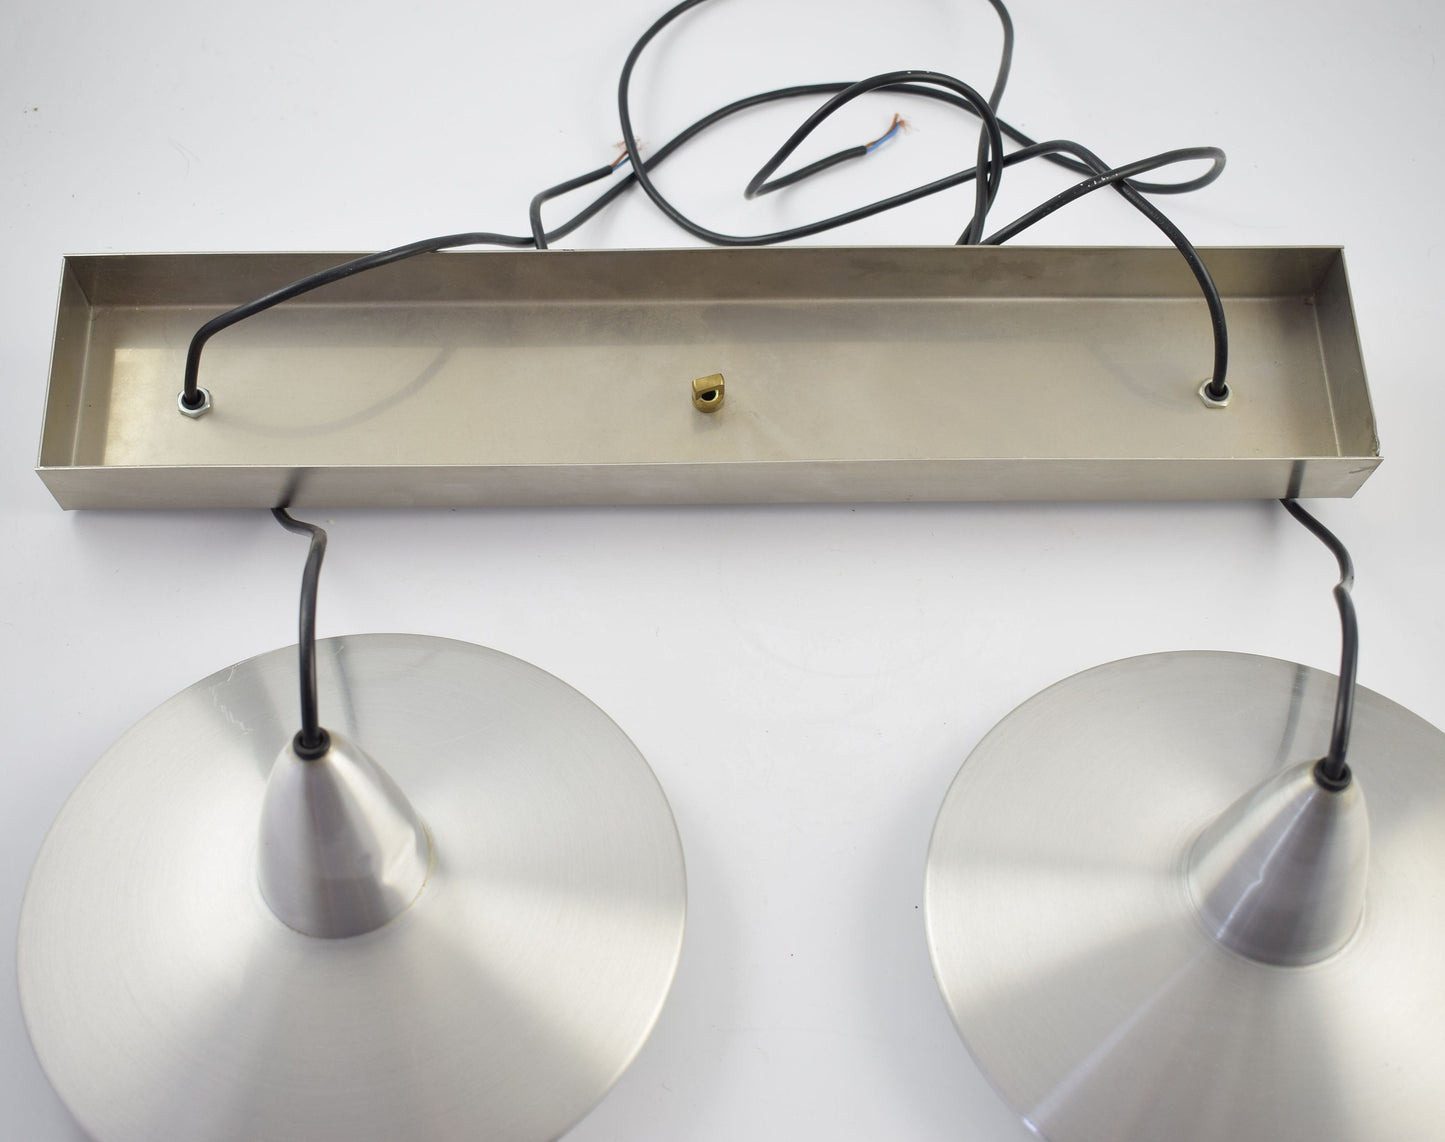 Two Aluminum hanging lamps, plus metal bar, in the shape of an ufo from dutch design company Hala.